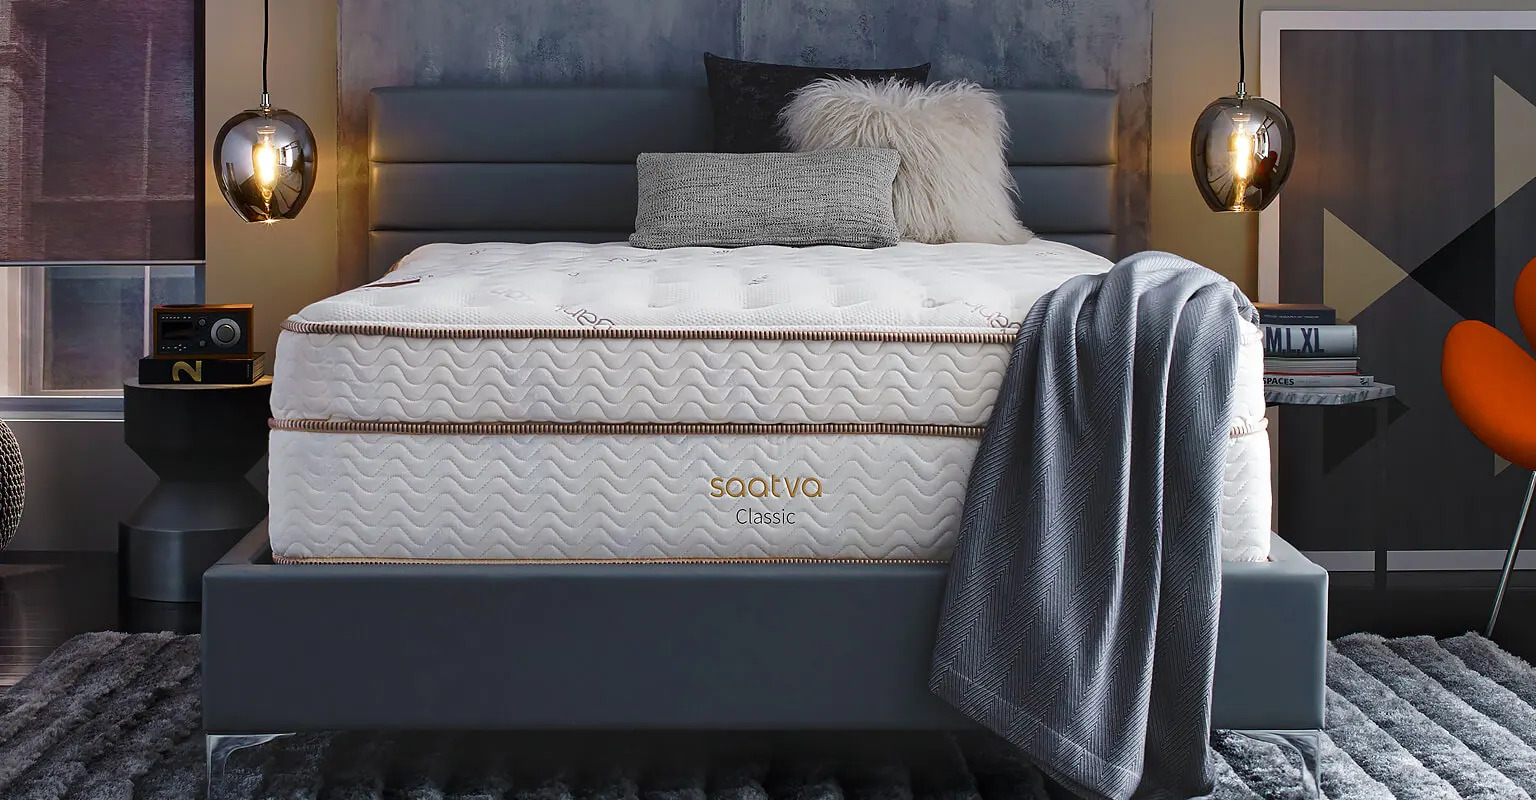 Top 71+ Alluring hotel quality mattresses for sale With Many New Styles